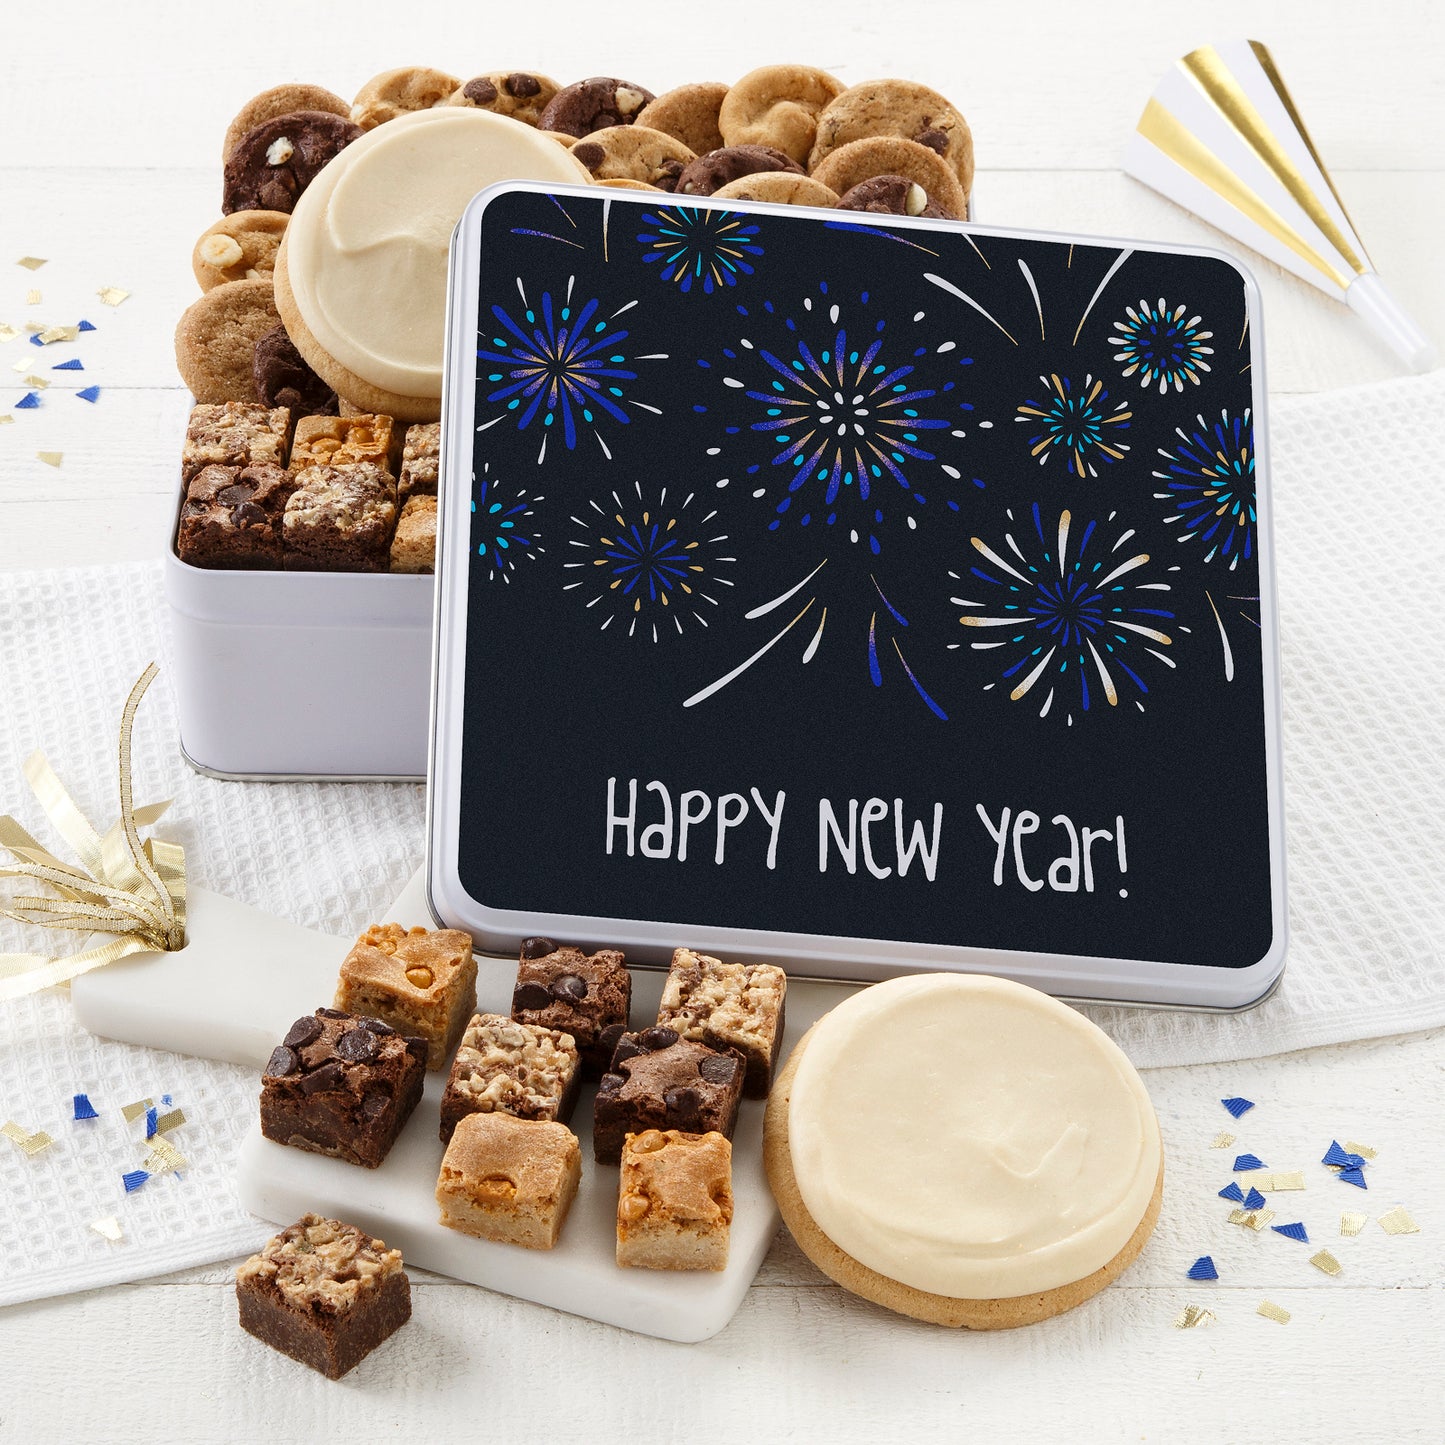 A Happy New Year gift tin filled with an assortment of Nibblers, brownie bites, and two frosted round cookies